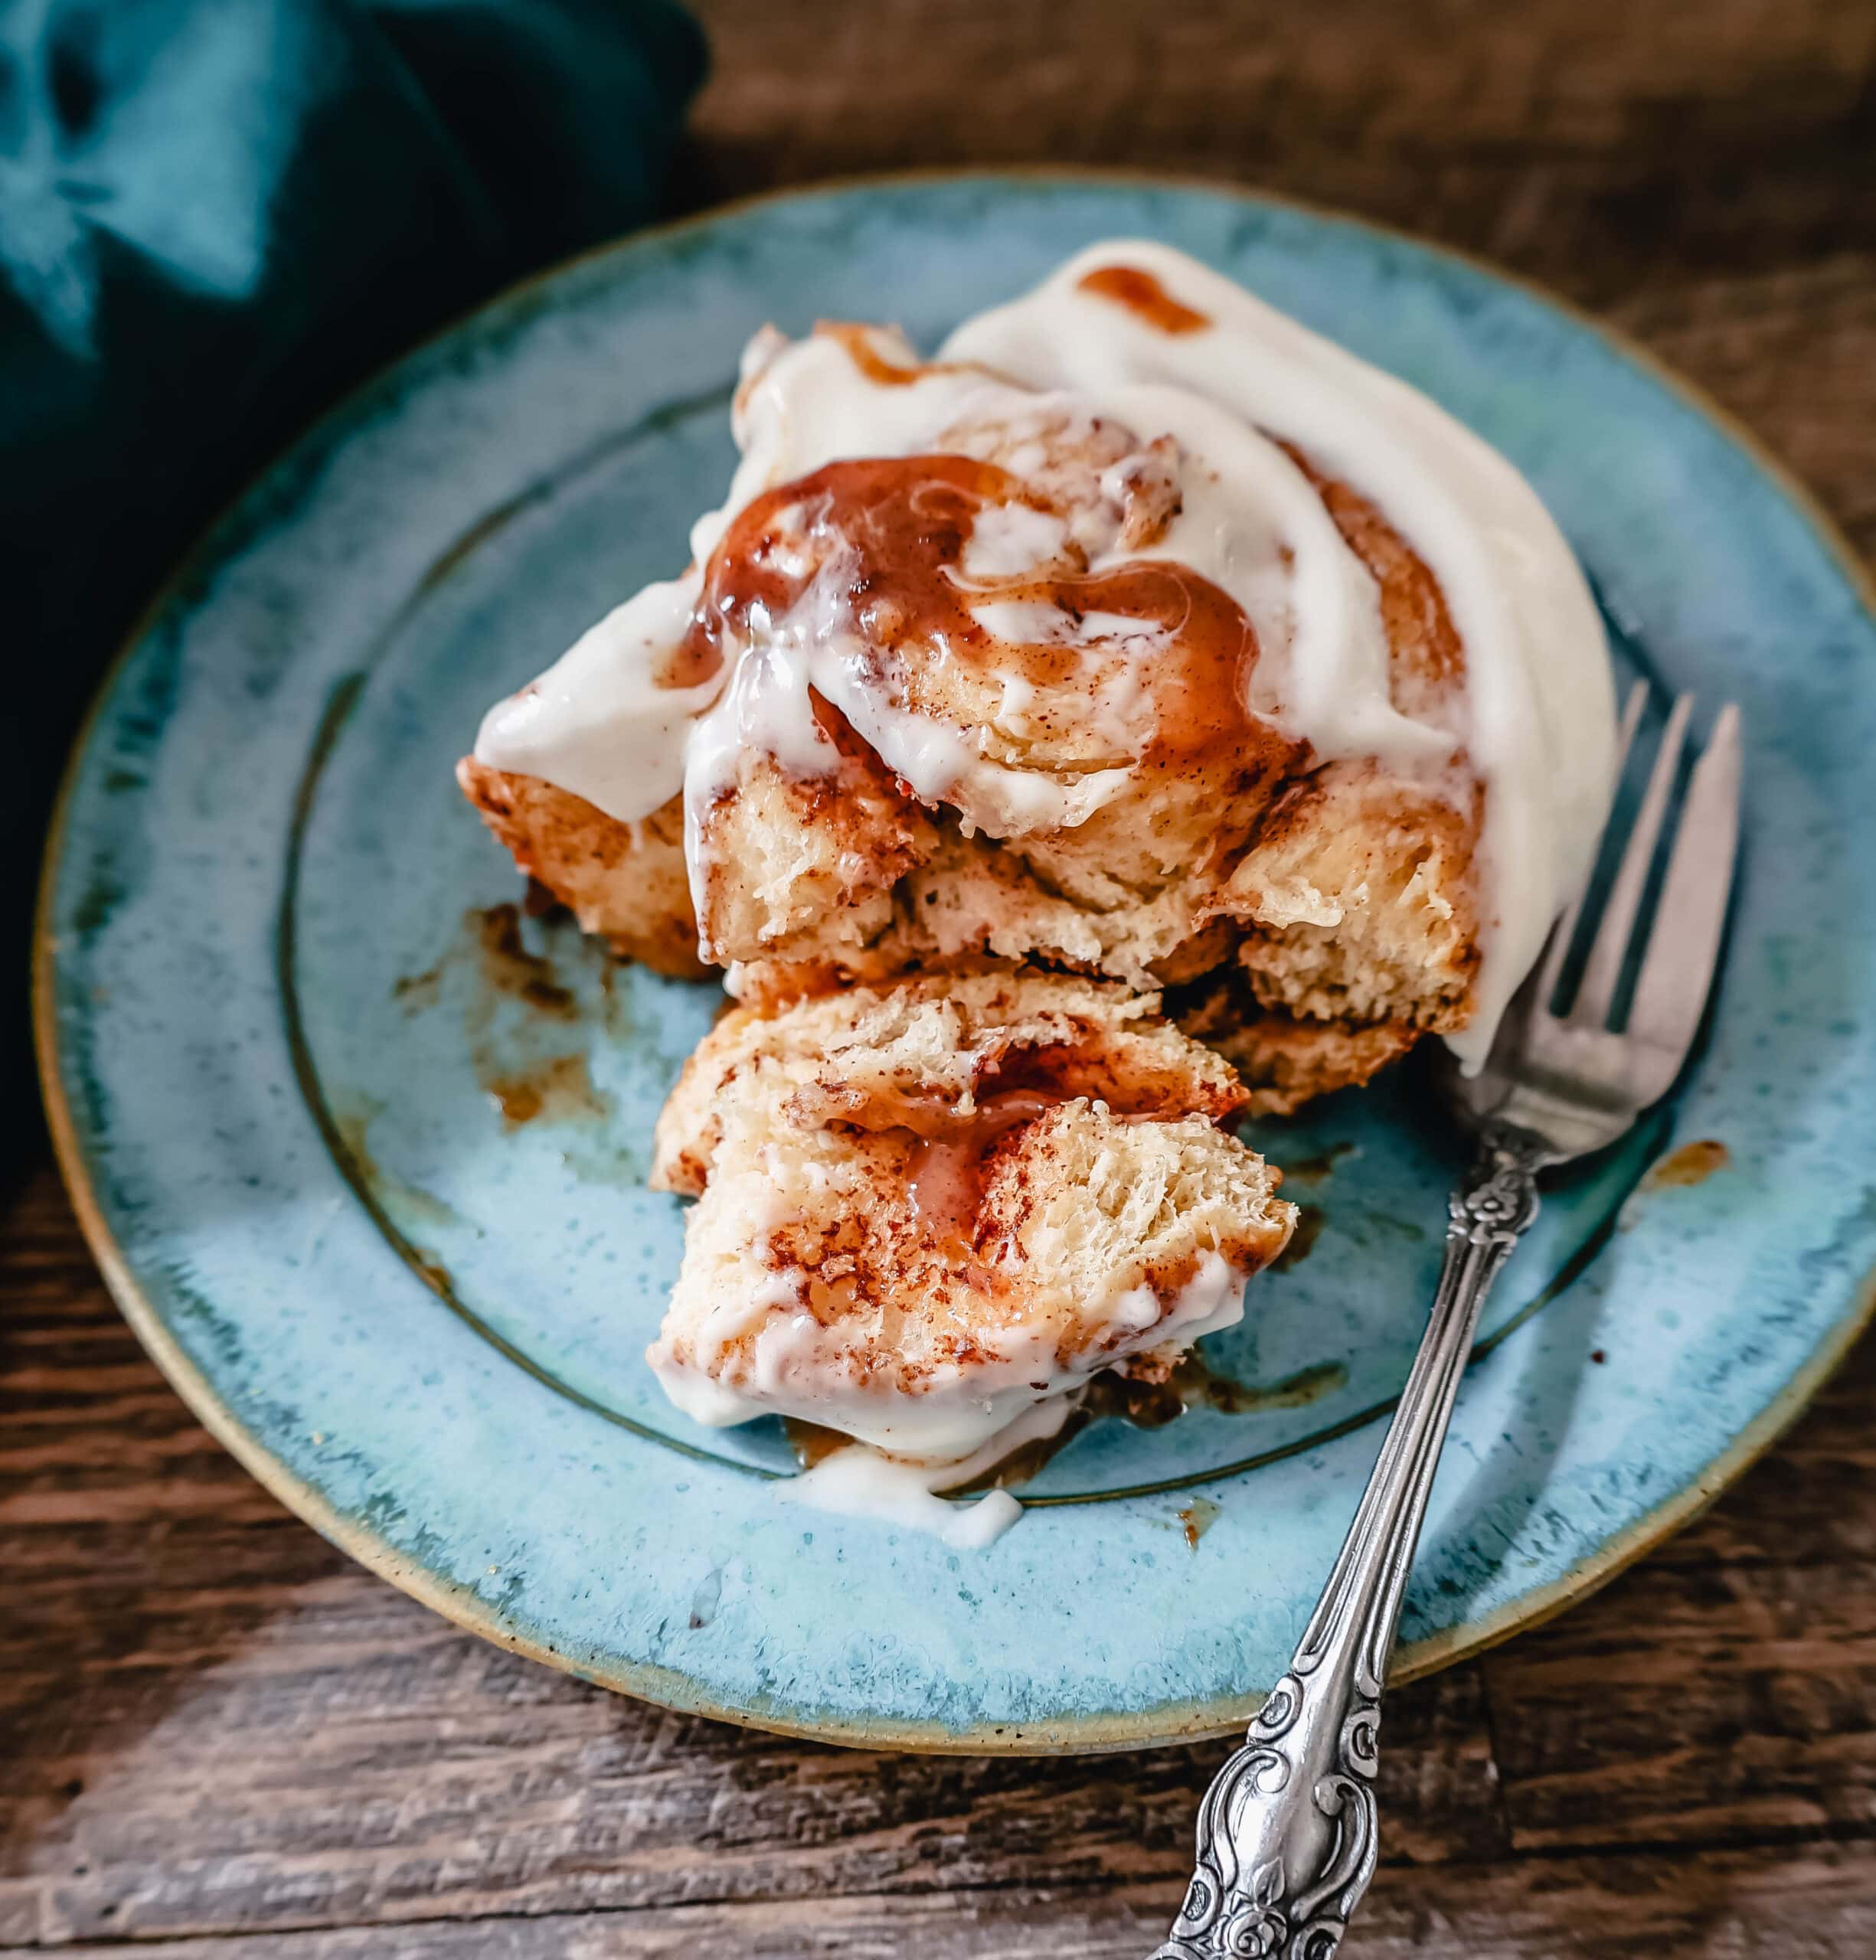 The famous, viral TikTok Cinnamon Rolls with heavy cream are even better than Cinnabon! These TikTok Cinnamon Rolls made with canned cinnamon rolls, a homemade buttery cinnamon drizzle, and a cream cheese frosting are the easiest cinnamon rolls you will ever make! 